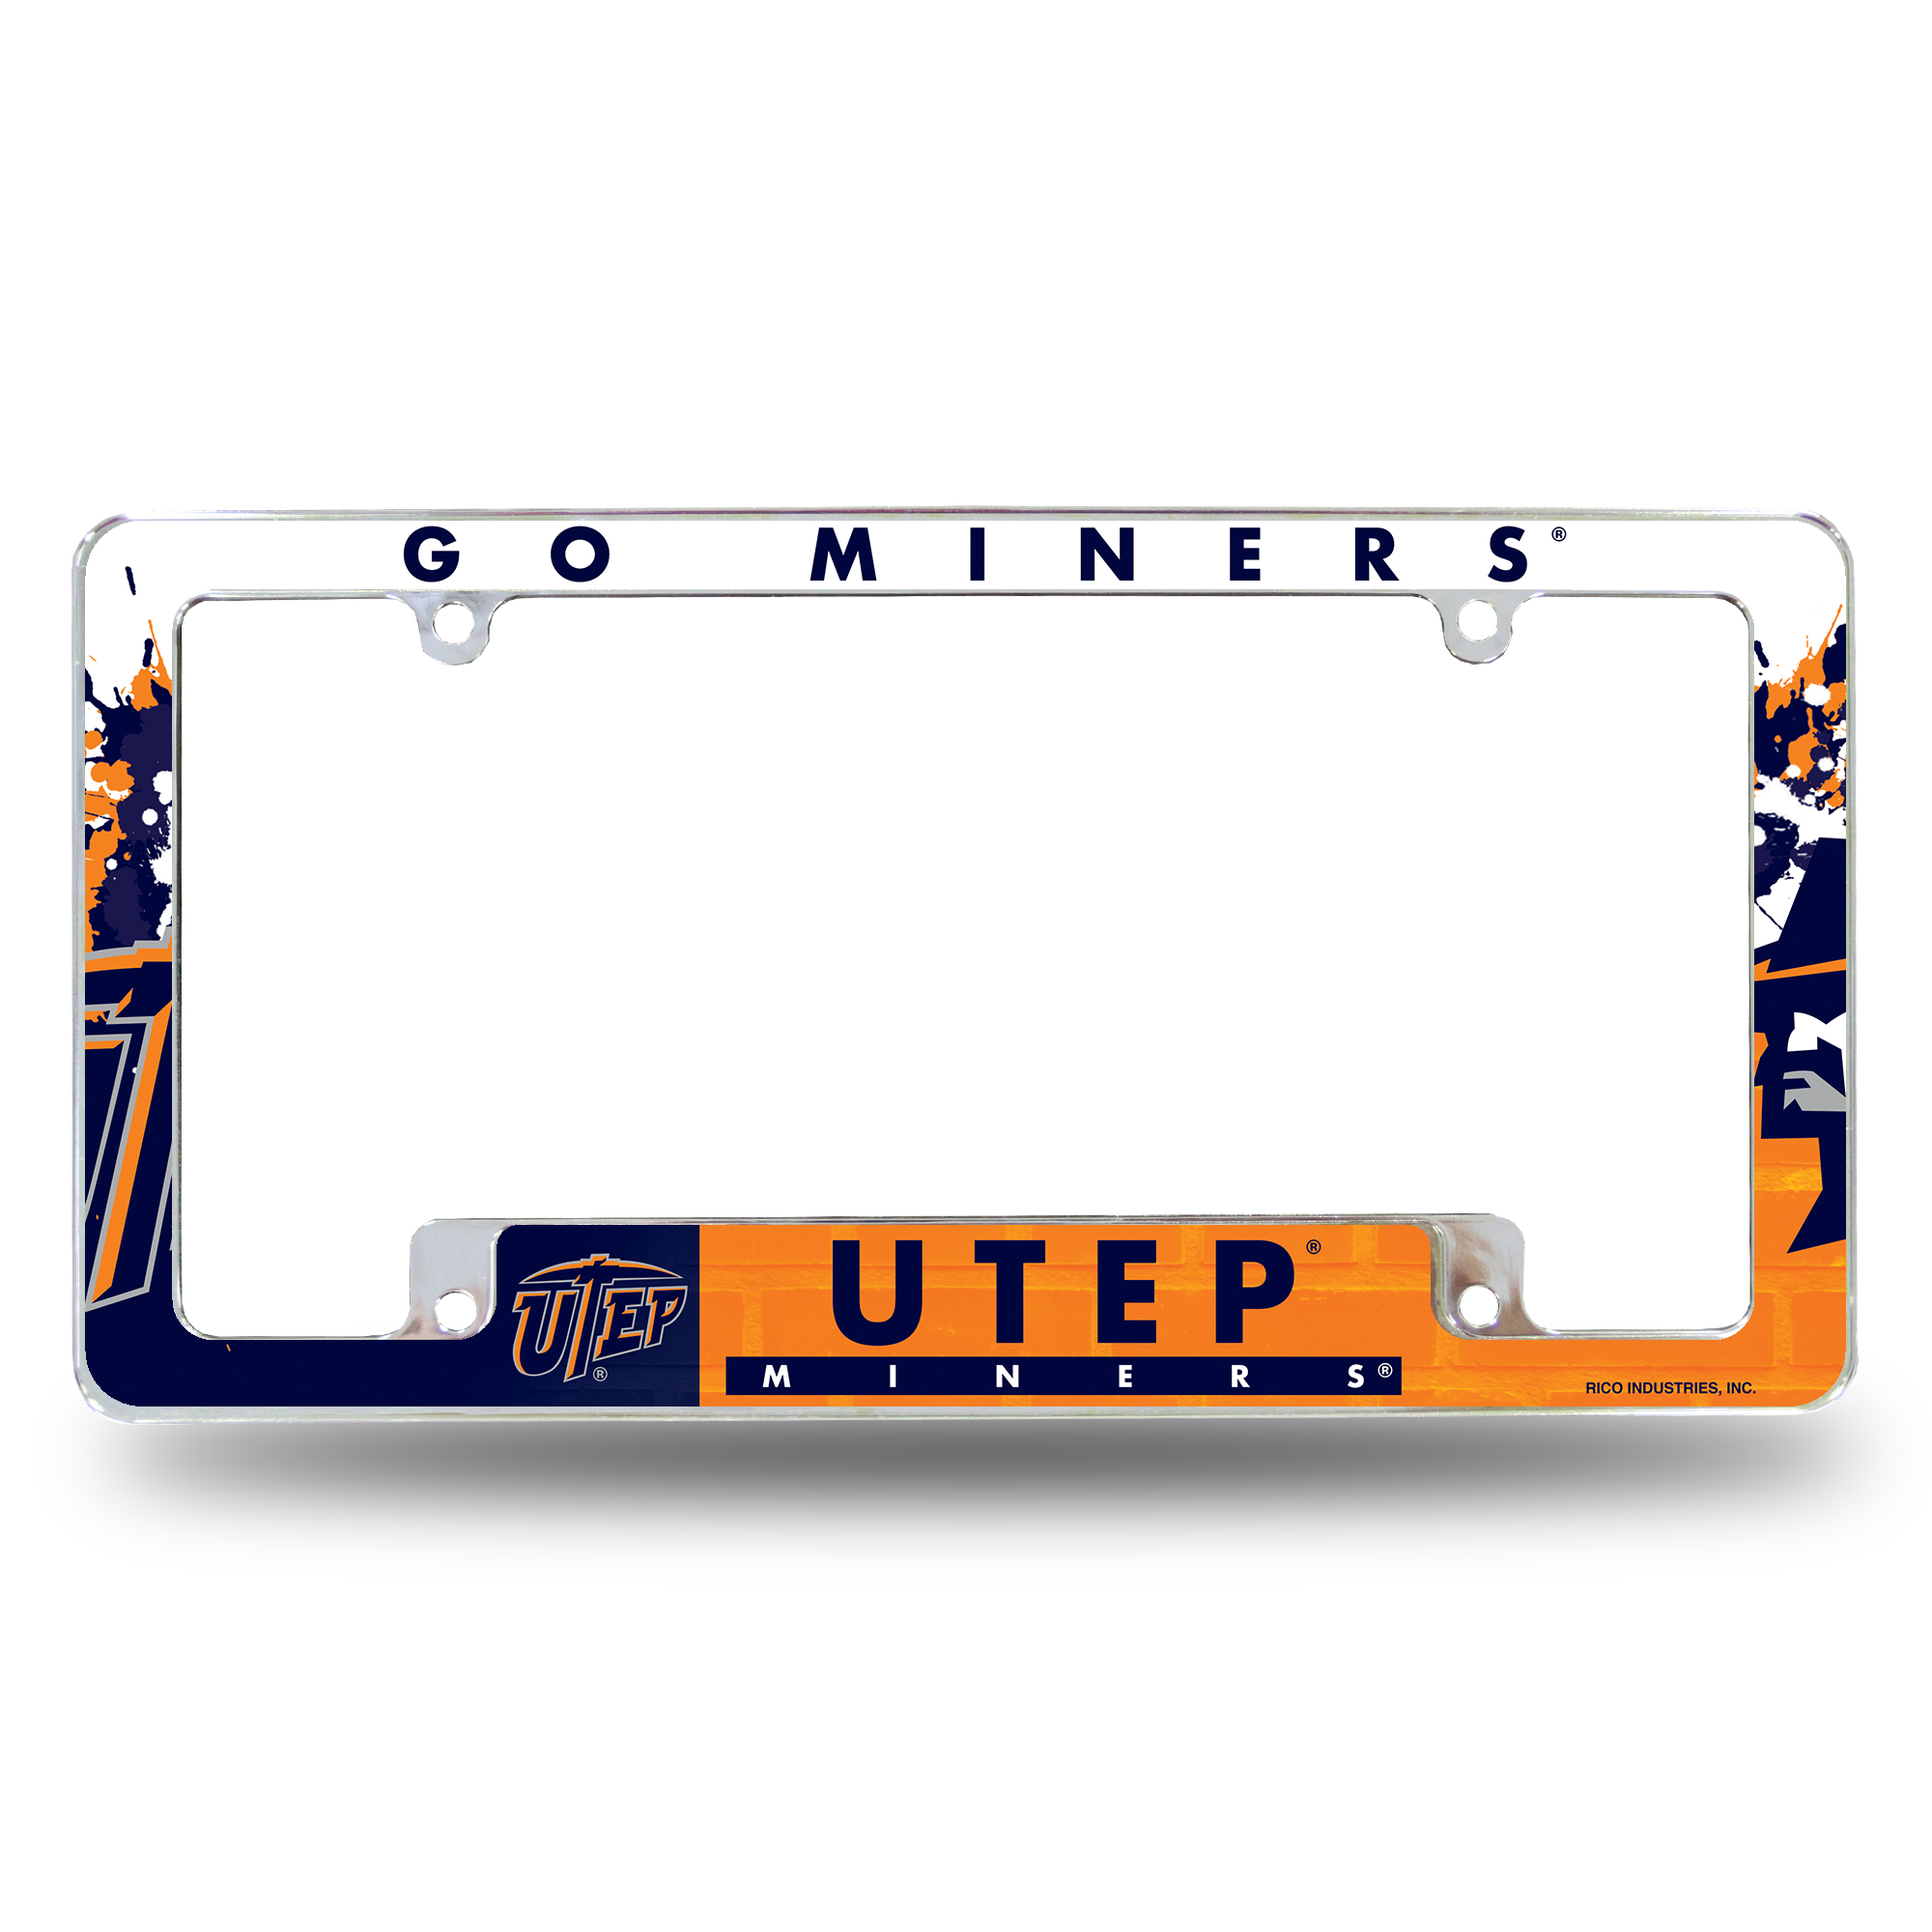 Texas El Paso NCAA Miners Chrome Metal License Plate Frame with Bold Full Frame Design - image 1 of 10